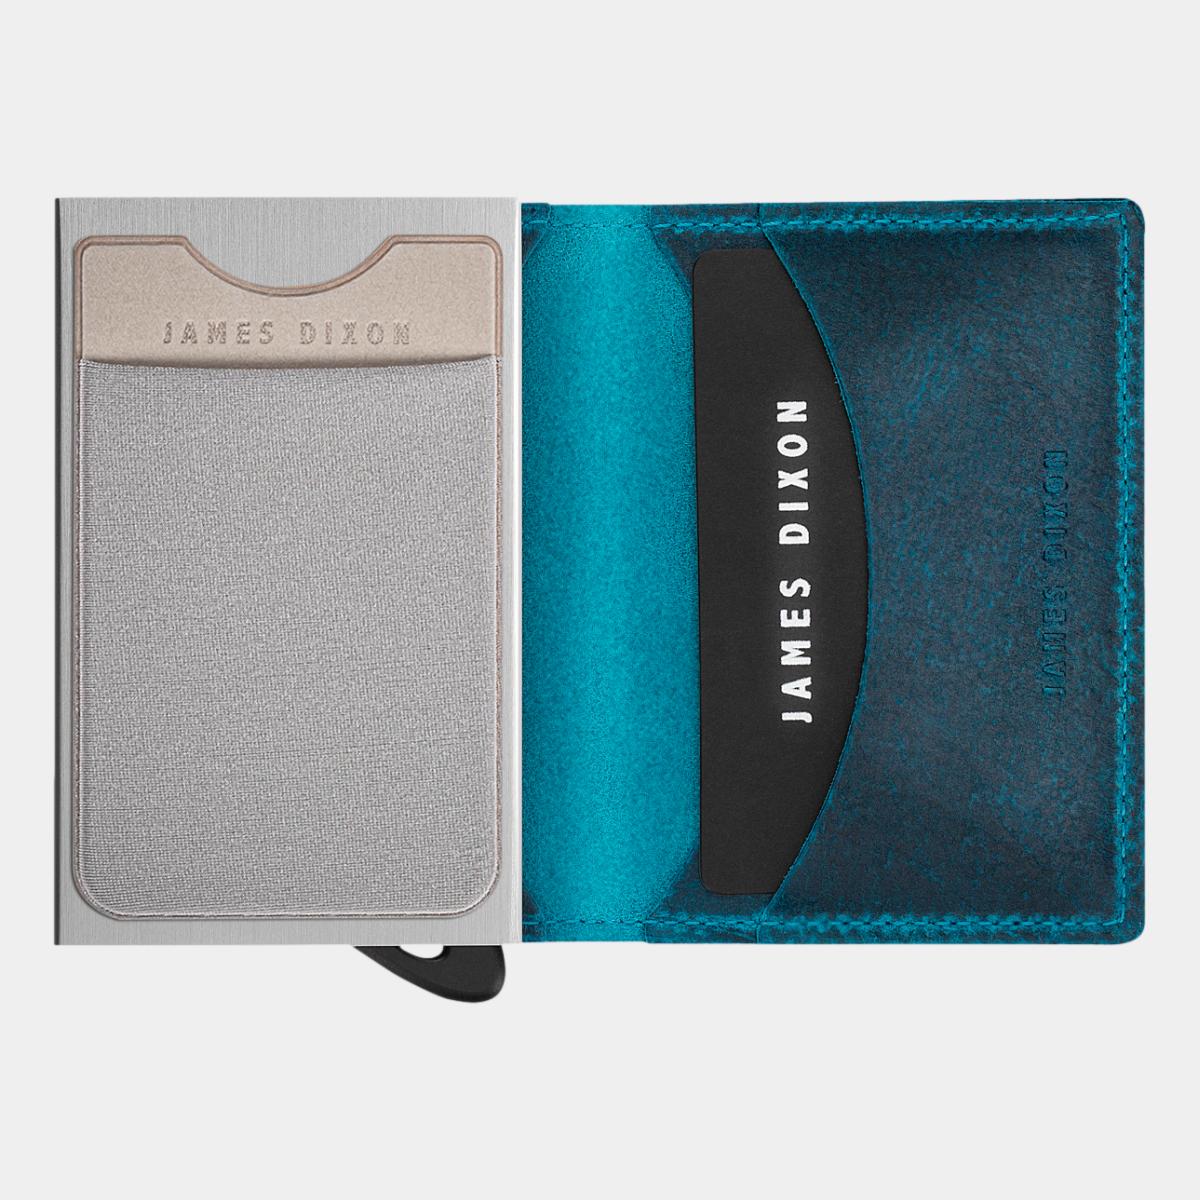 jd0068 james dixon extra cards grey pocket on puro raw wallet open